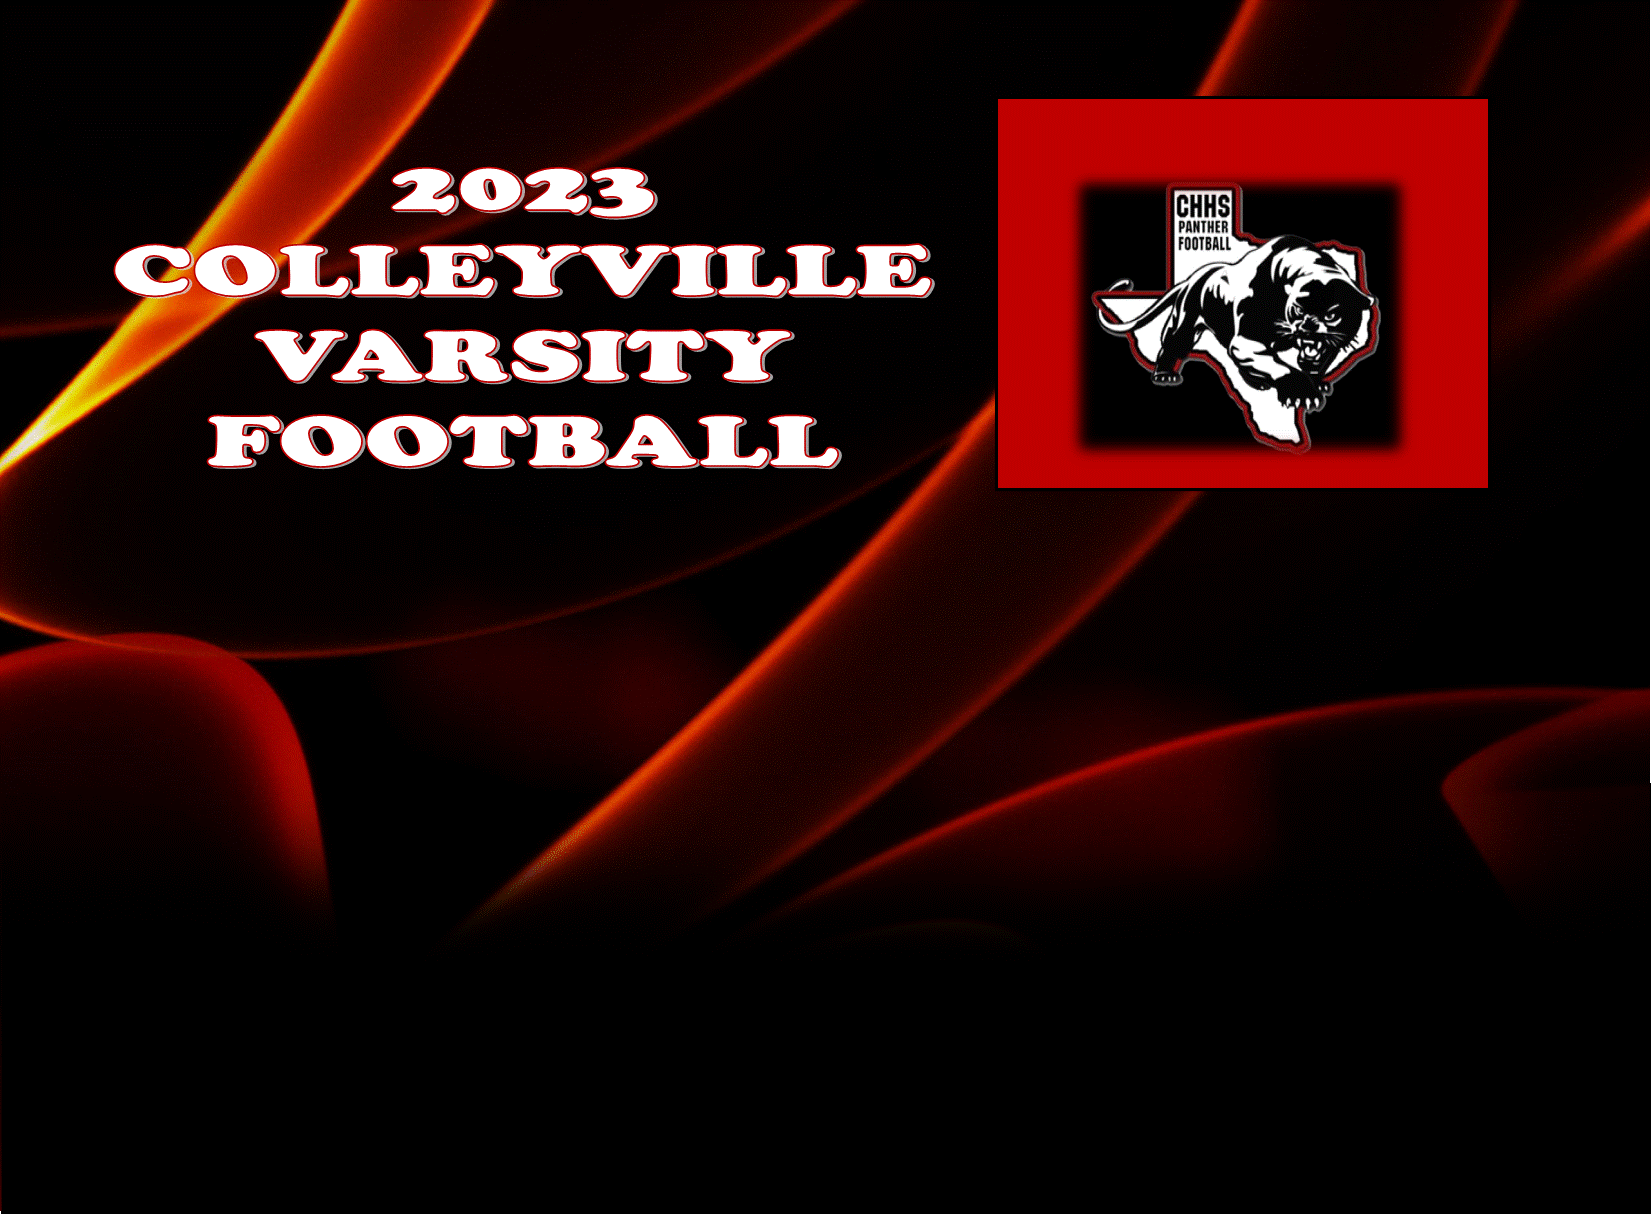 GCISD Football: Colleyville Heritage Panthers Defeat FW Polytechnic Parrots to Win District Championship 49-18